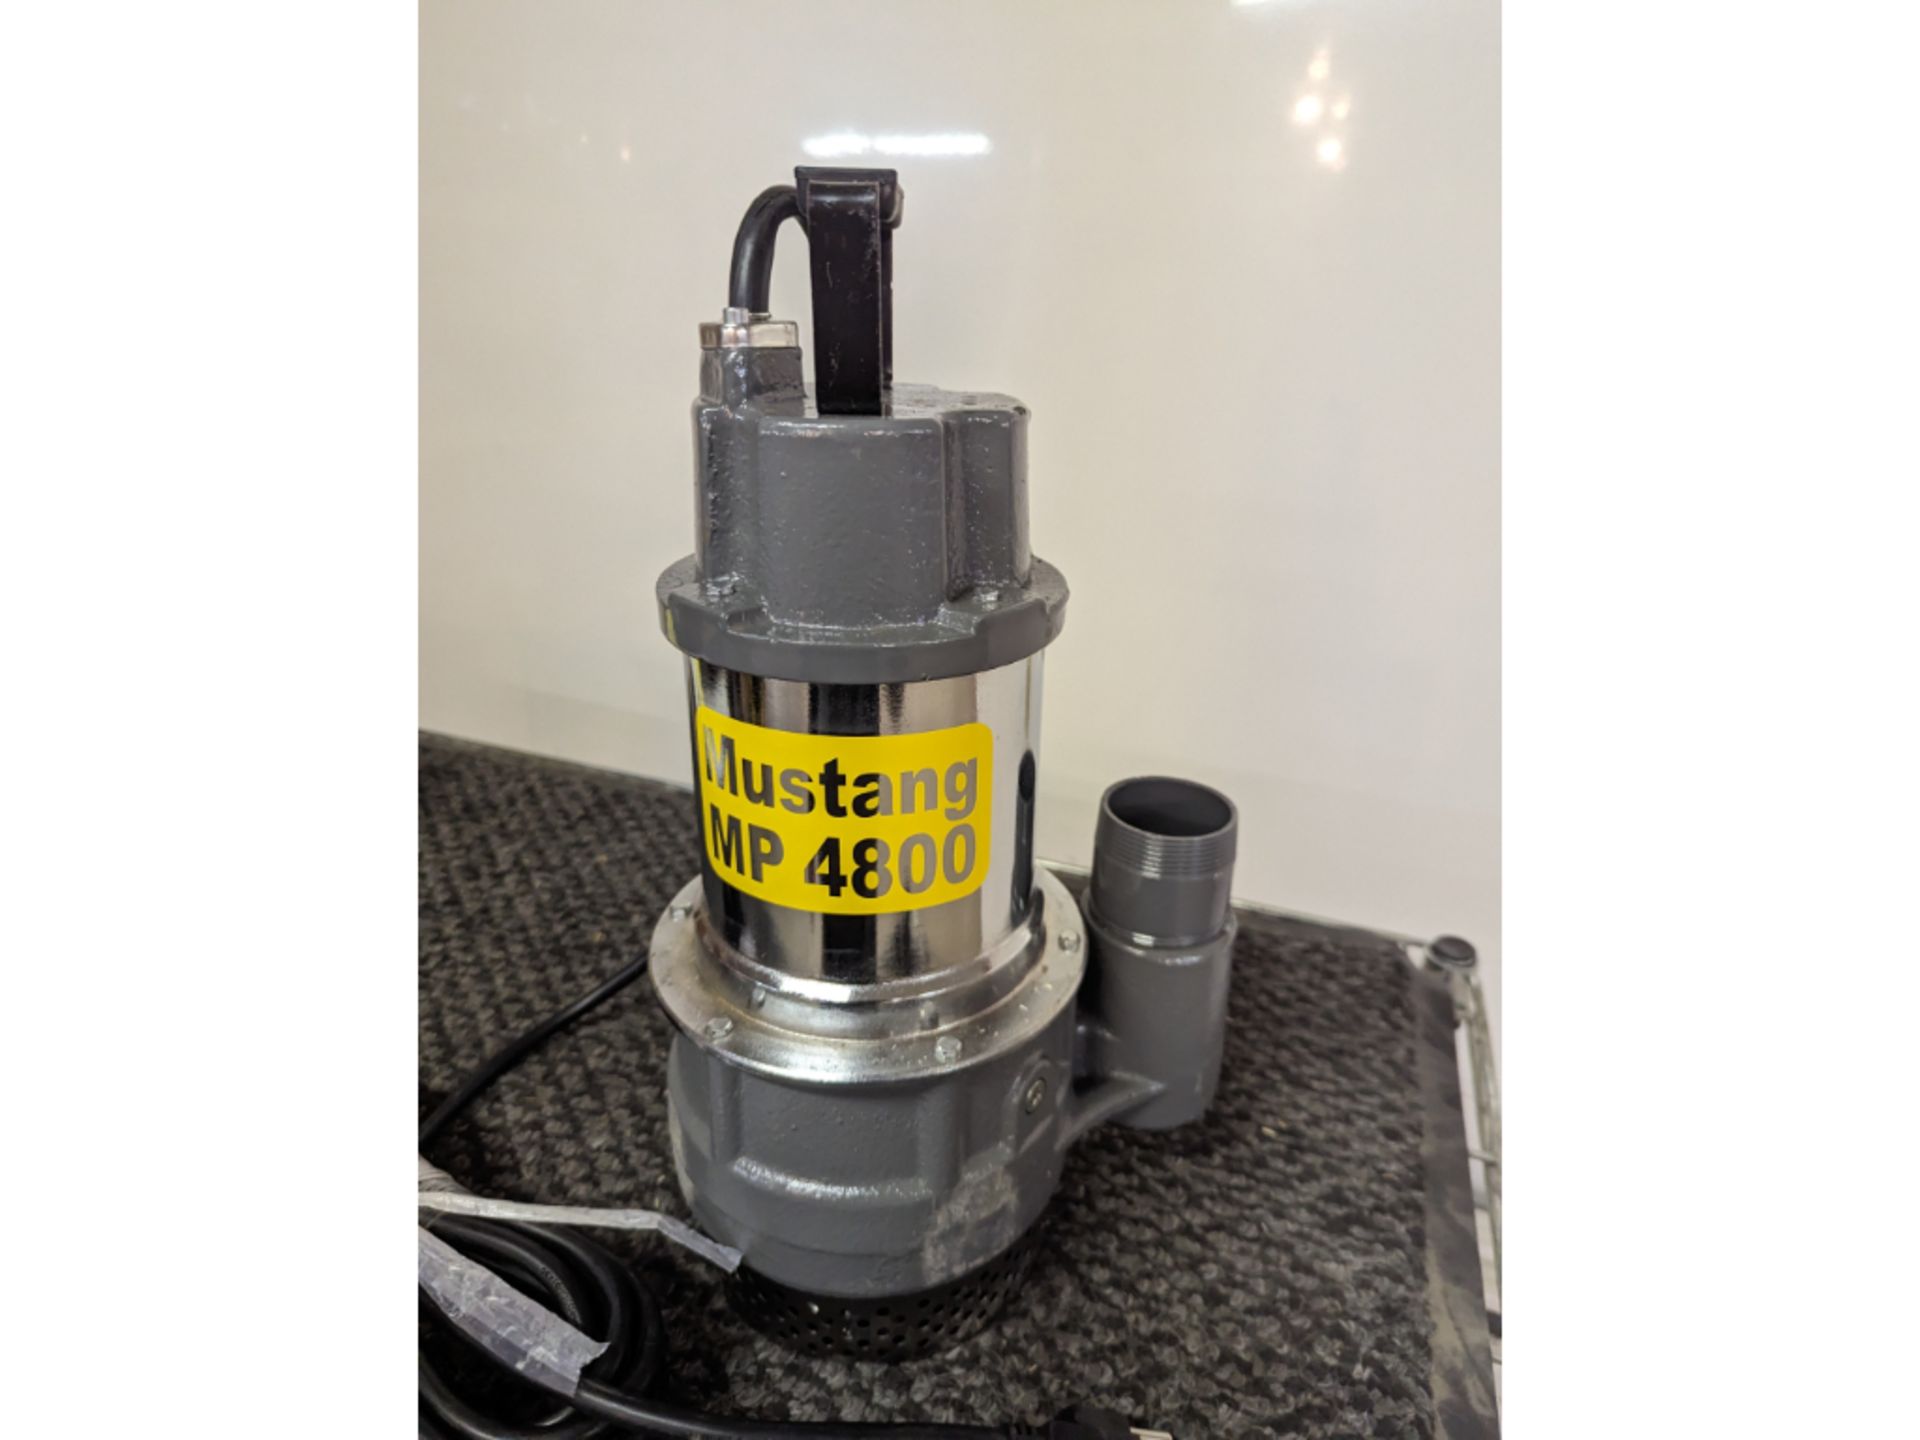 Mustang MP4800 Submersible Pump - Image 2 of 2